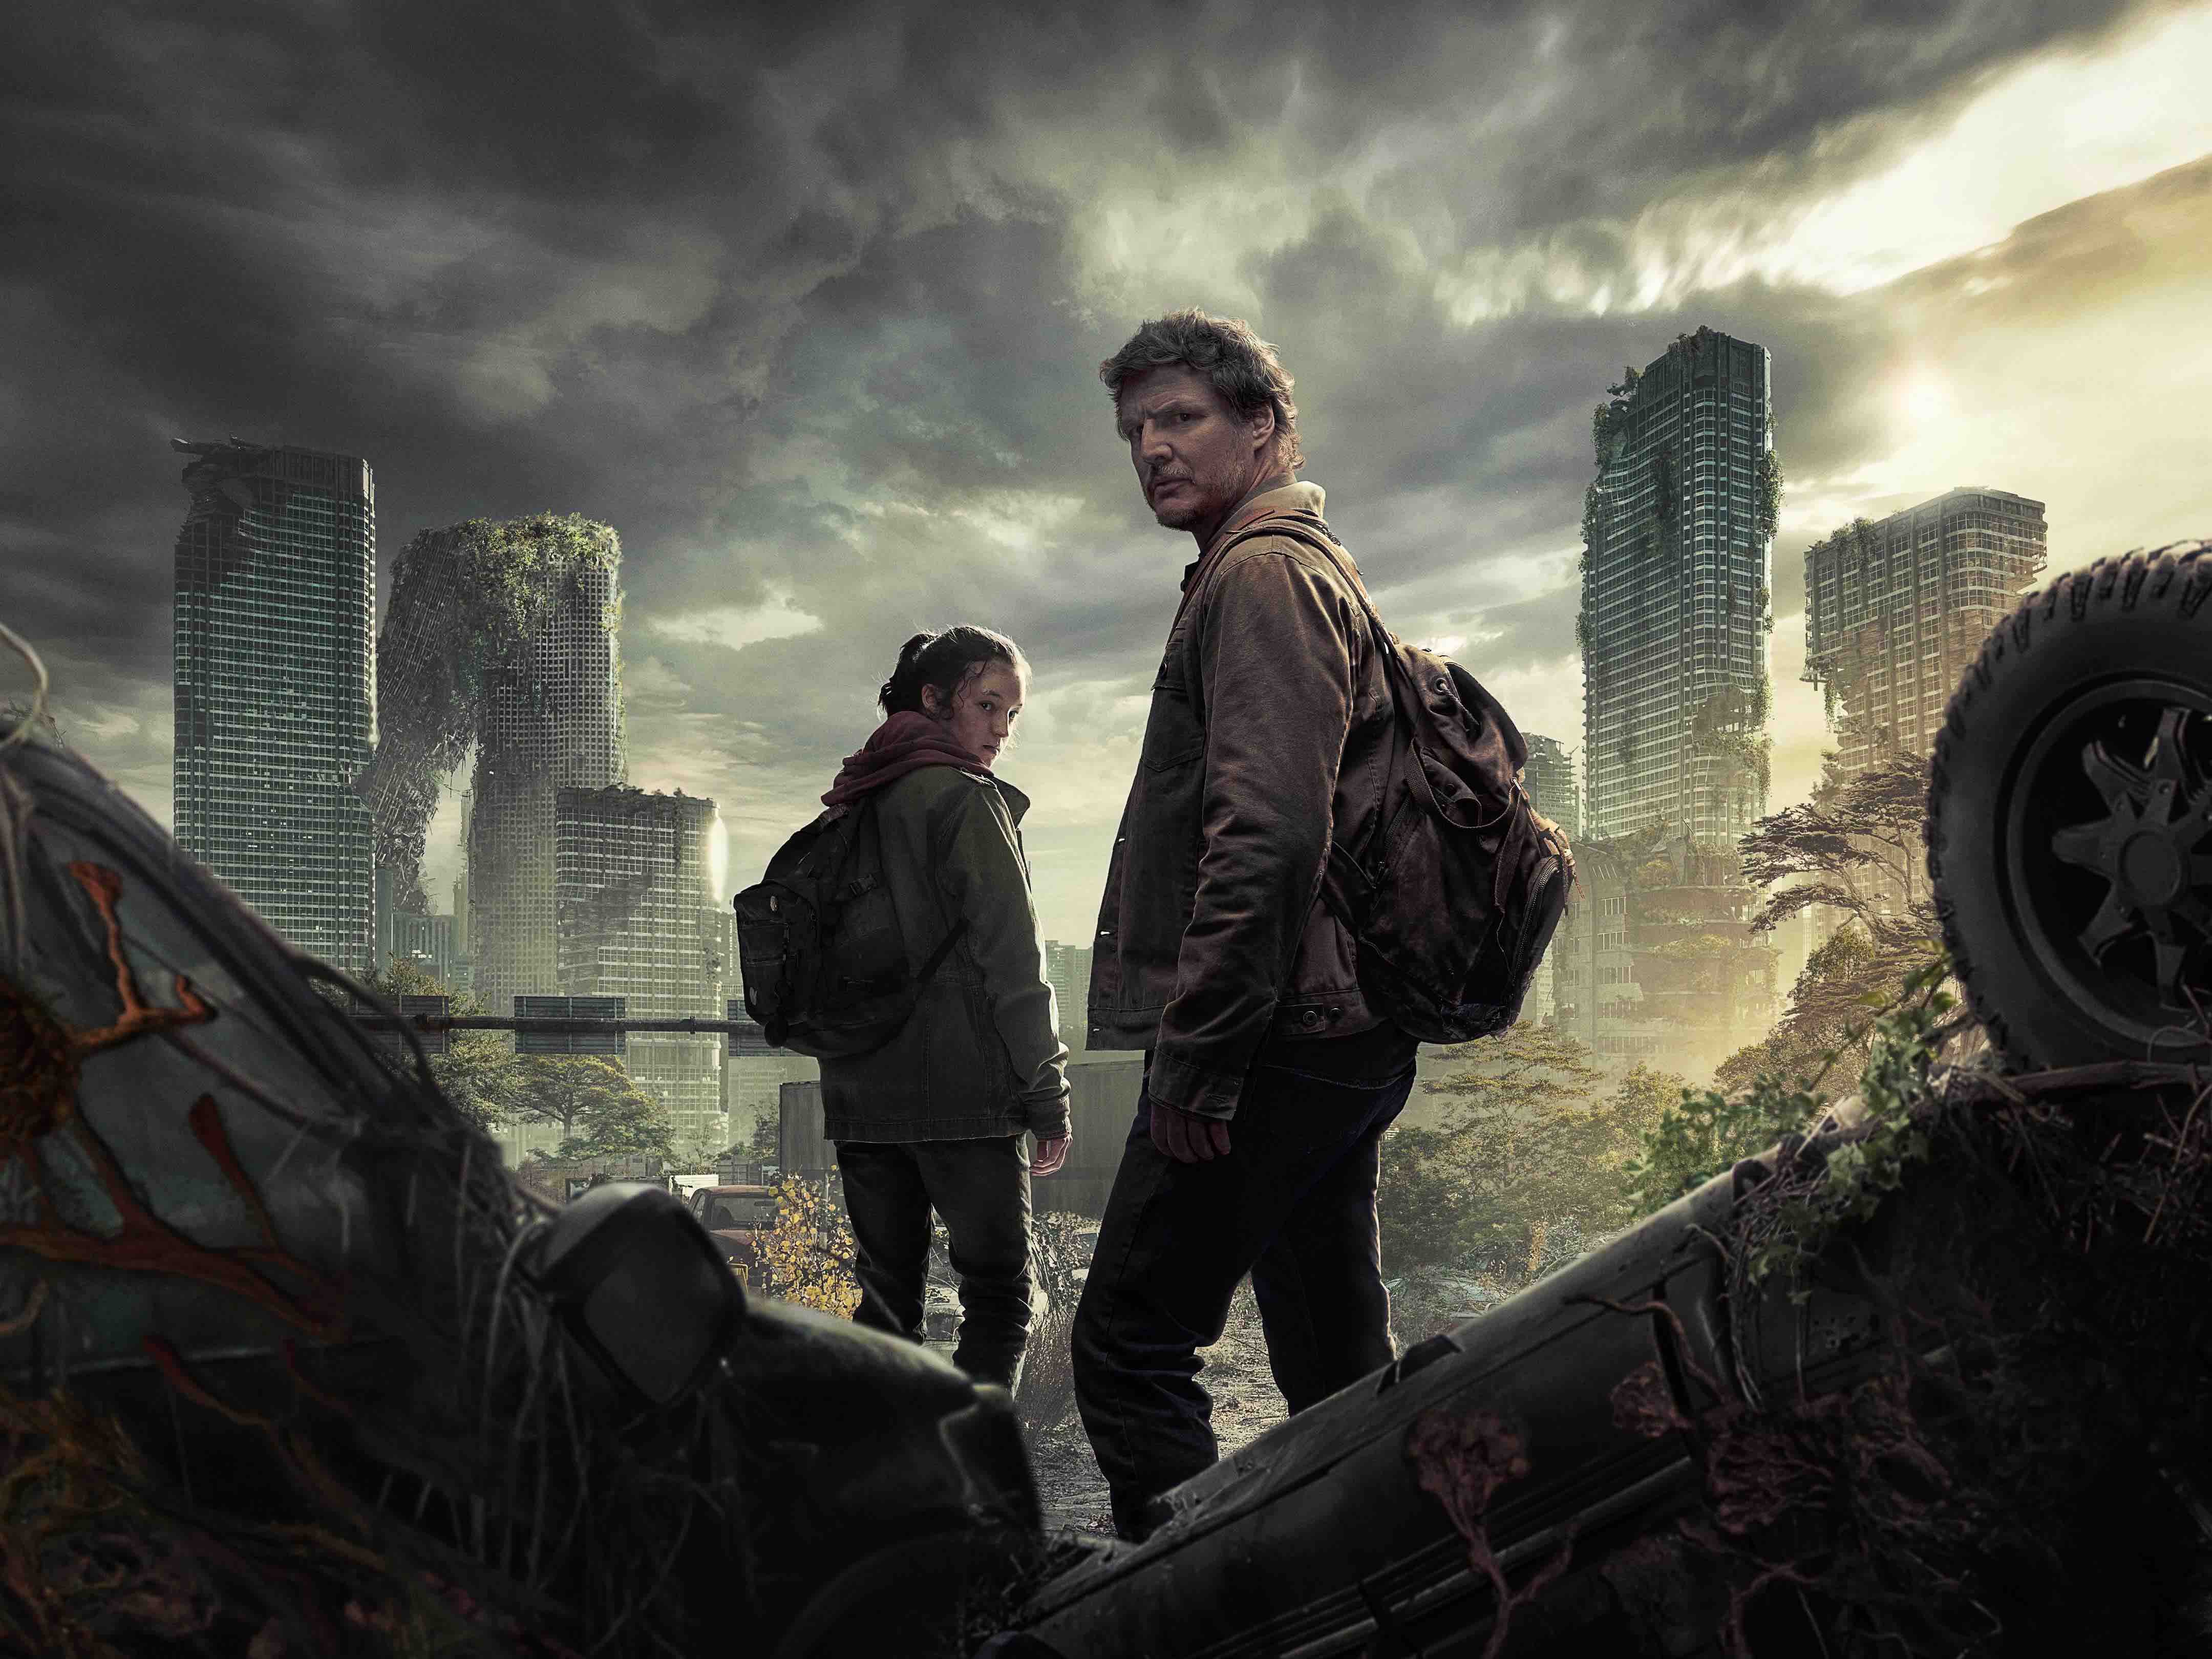 New HBO Last of Us Picture Reveals Joel, Ellie, Clickers